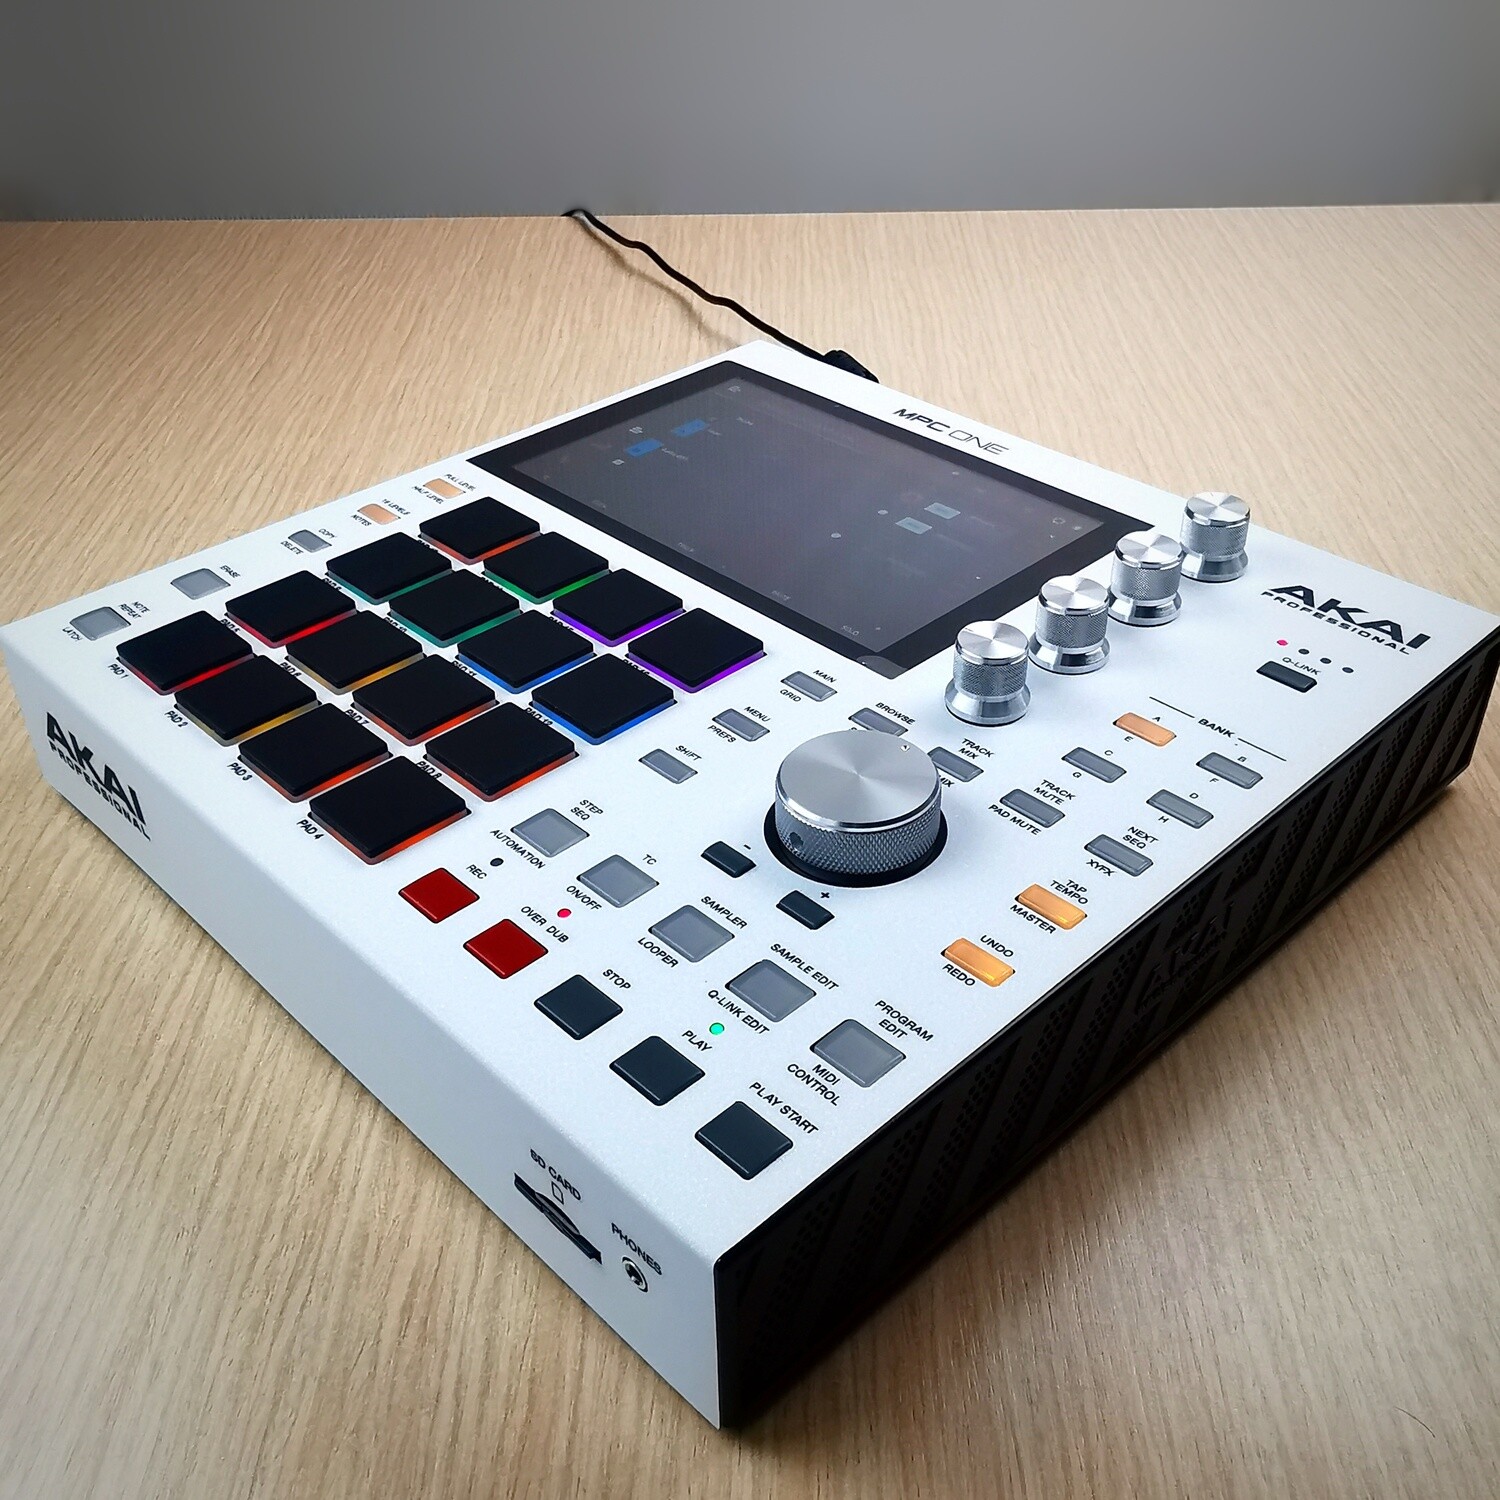 Vinyl skins for AKAI MPC ONE, One+ (choose color), CHOOSE YOUR STYLE: WHITE